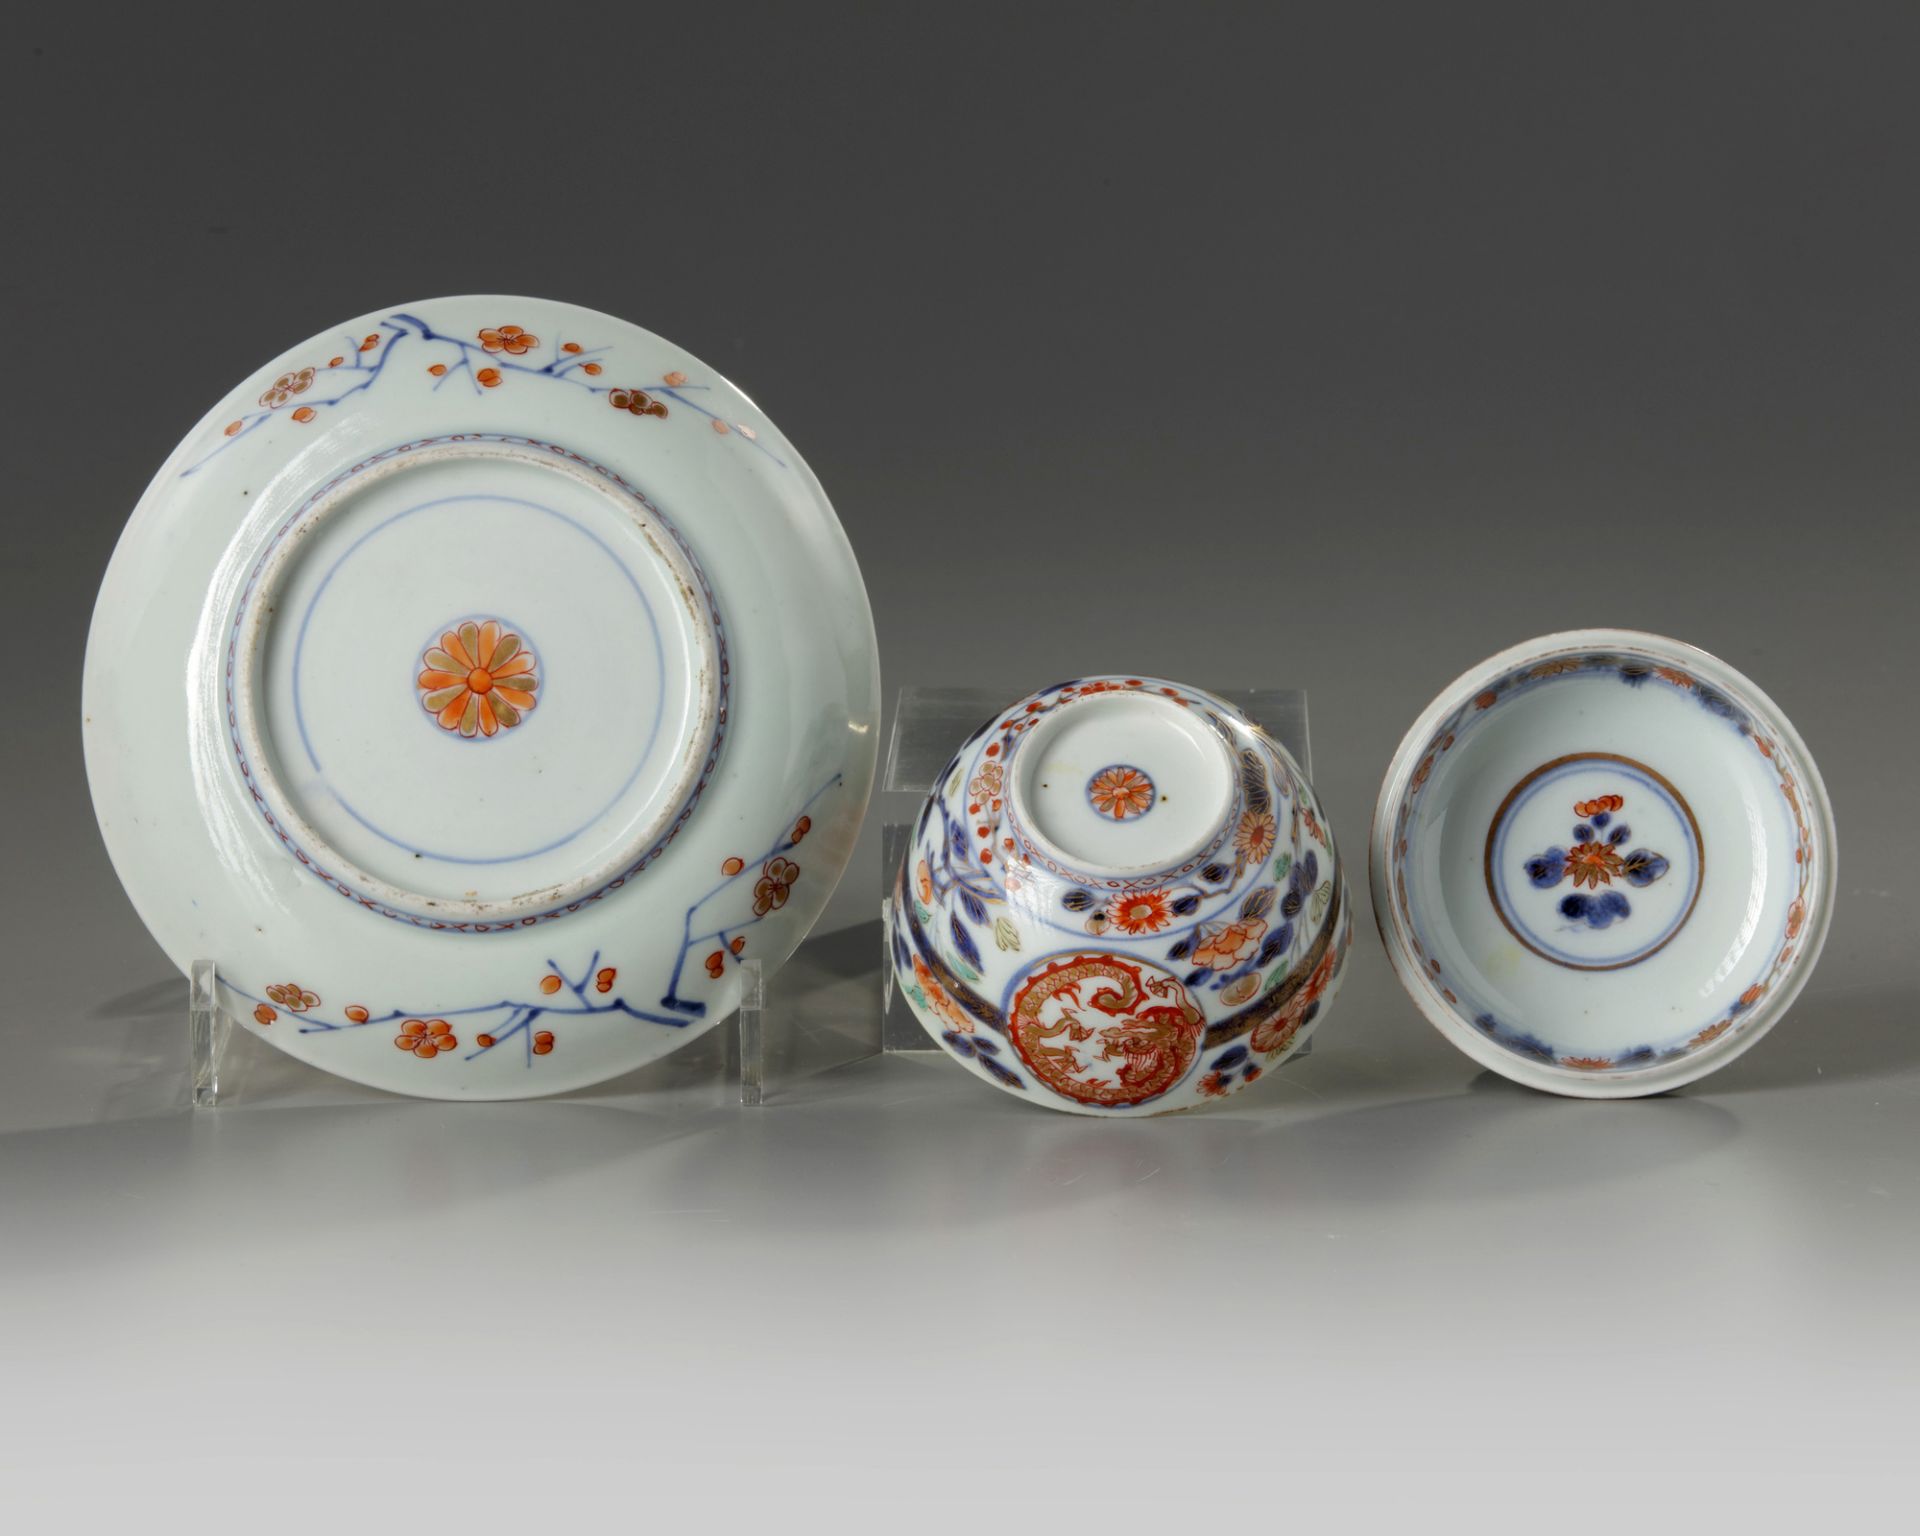 A JAPANESE IMARI TEACUP WITH COVER AND SAUCER, 17TH CENTURY - Image 6 of 6